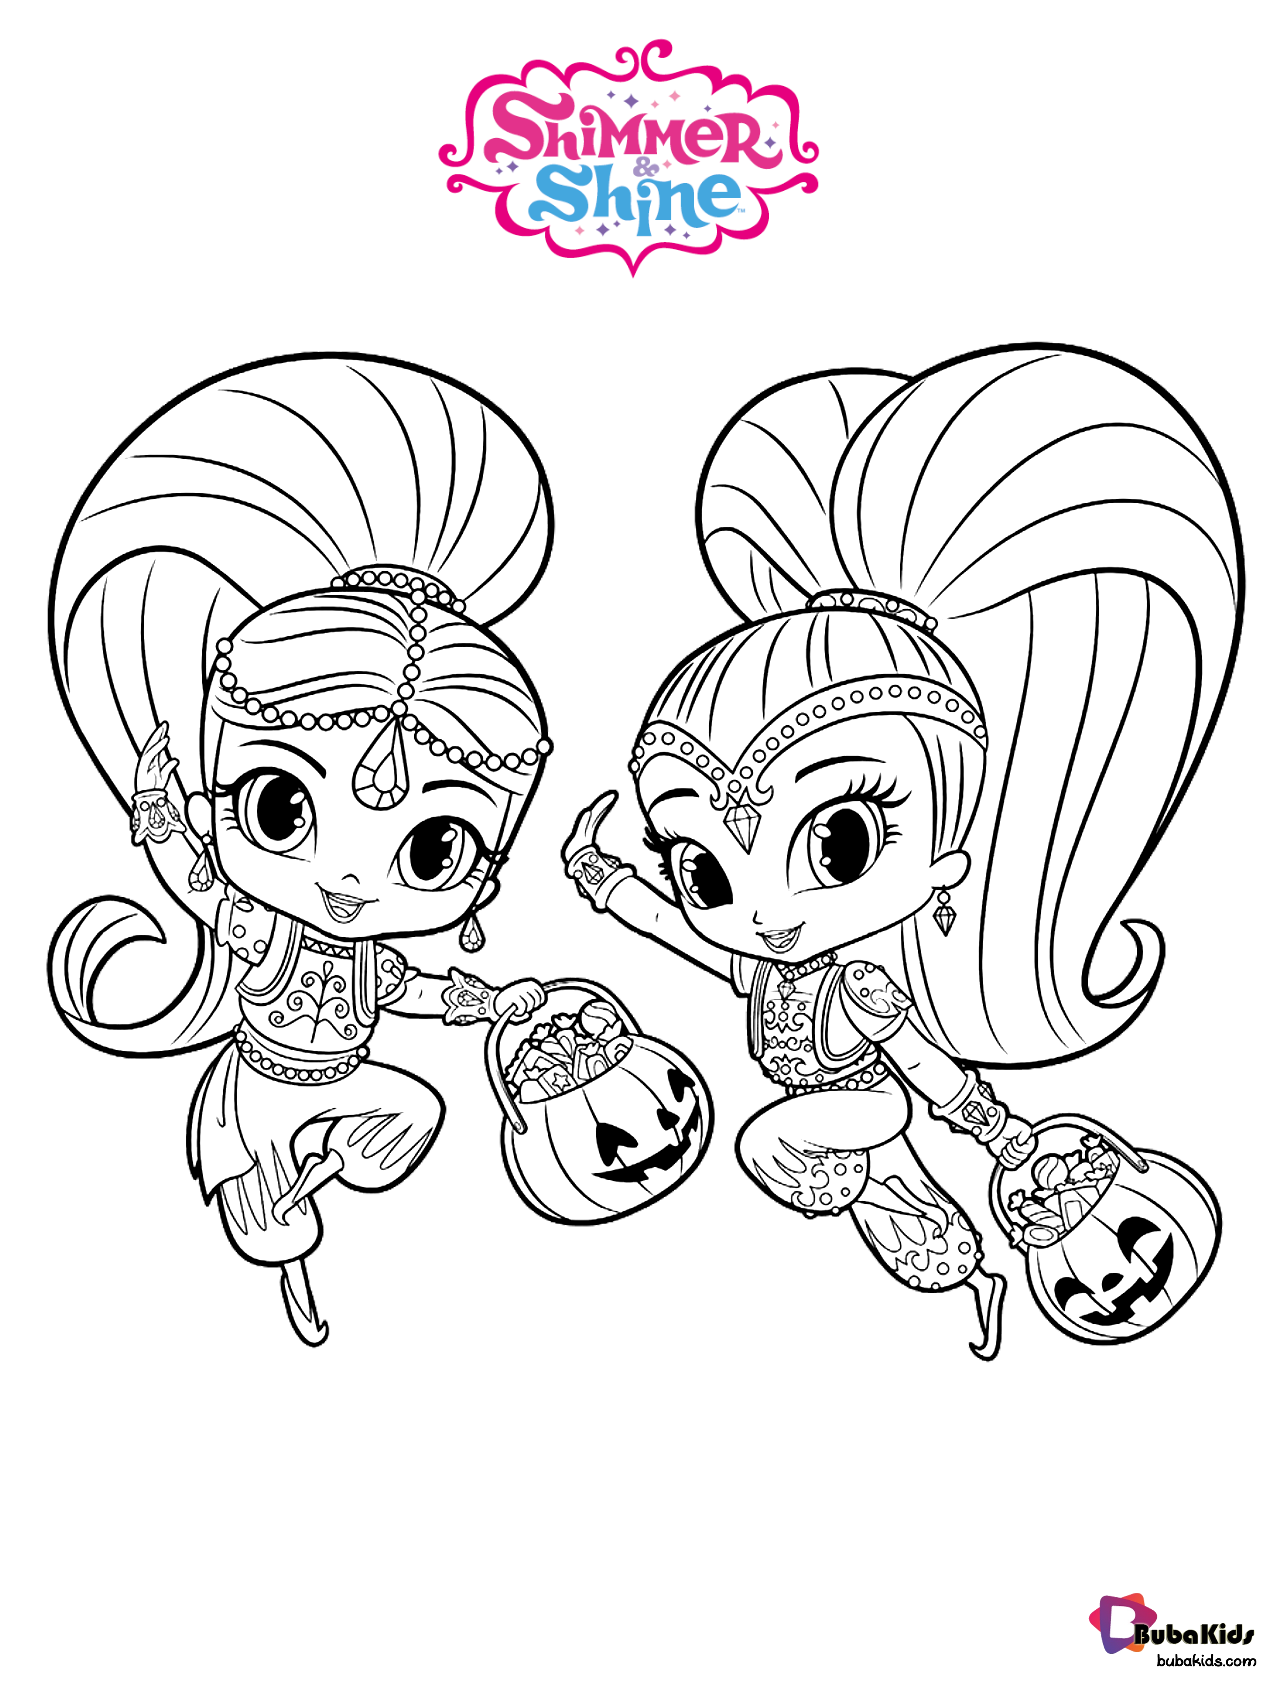 Shimmer and shine the twin genies free coloring page